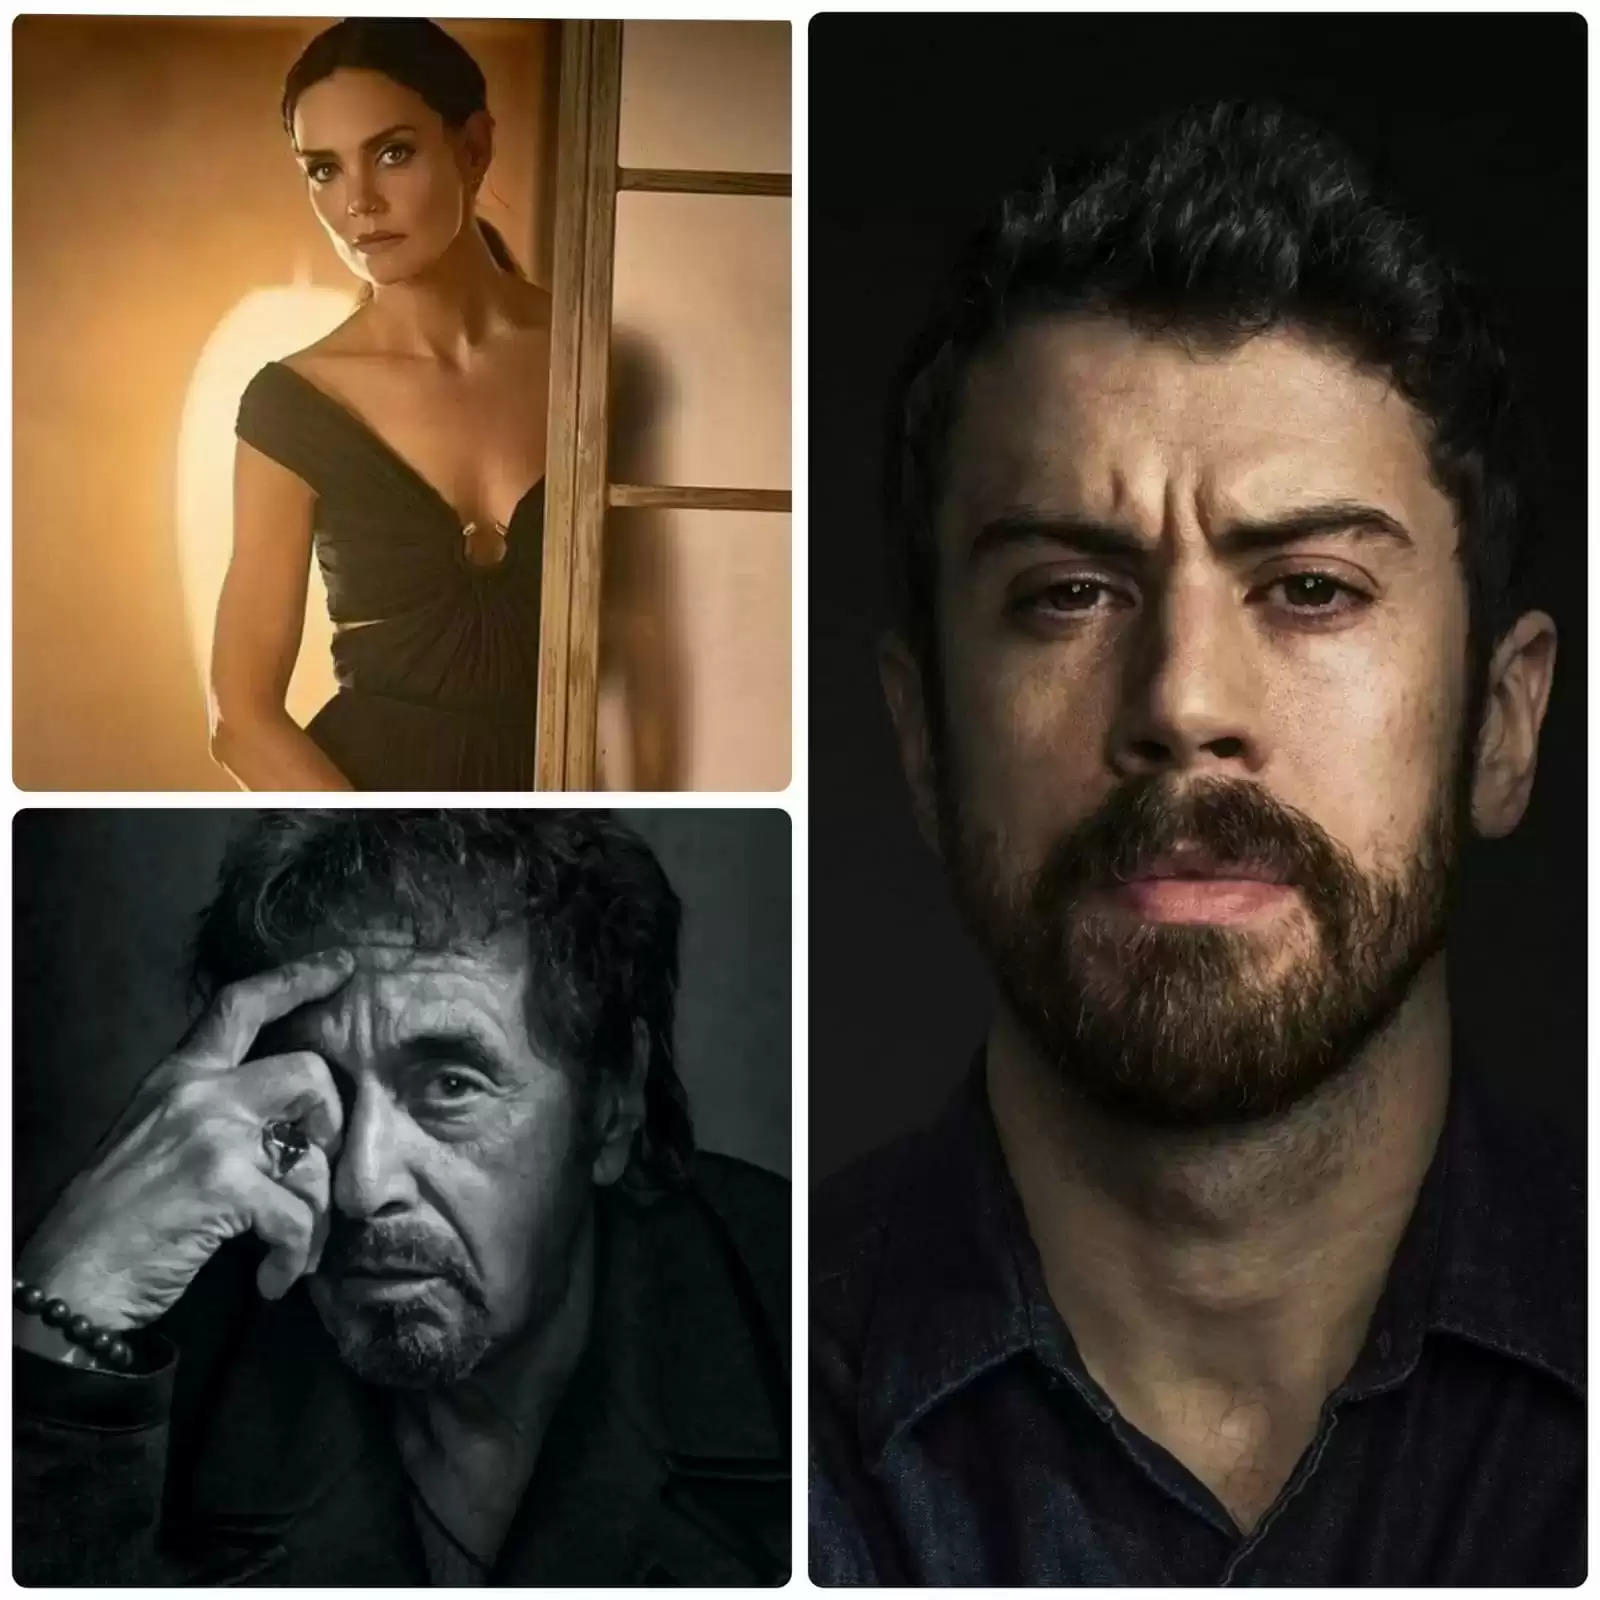 CANNES MARKET ABUZZ WITH MANASVI MAMGAI AND 32RED ENTERTAINMENT'S FILM “CAPTIVATED” FEATURING KATIE HOLMES, TOBY KEBBELL & OSCAR WINNER AL PACINO